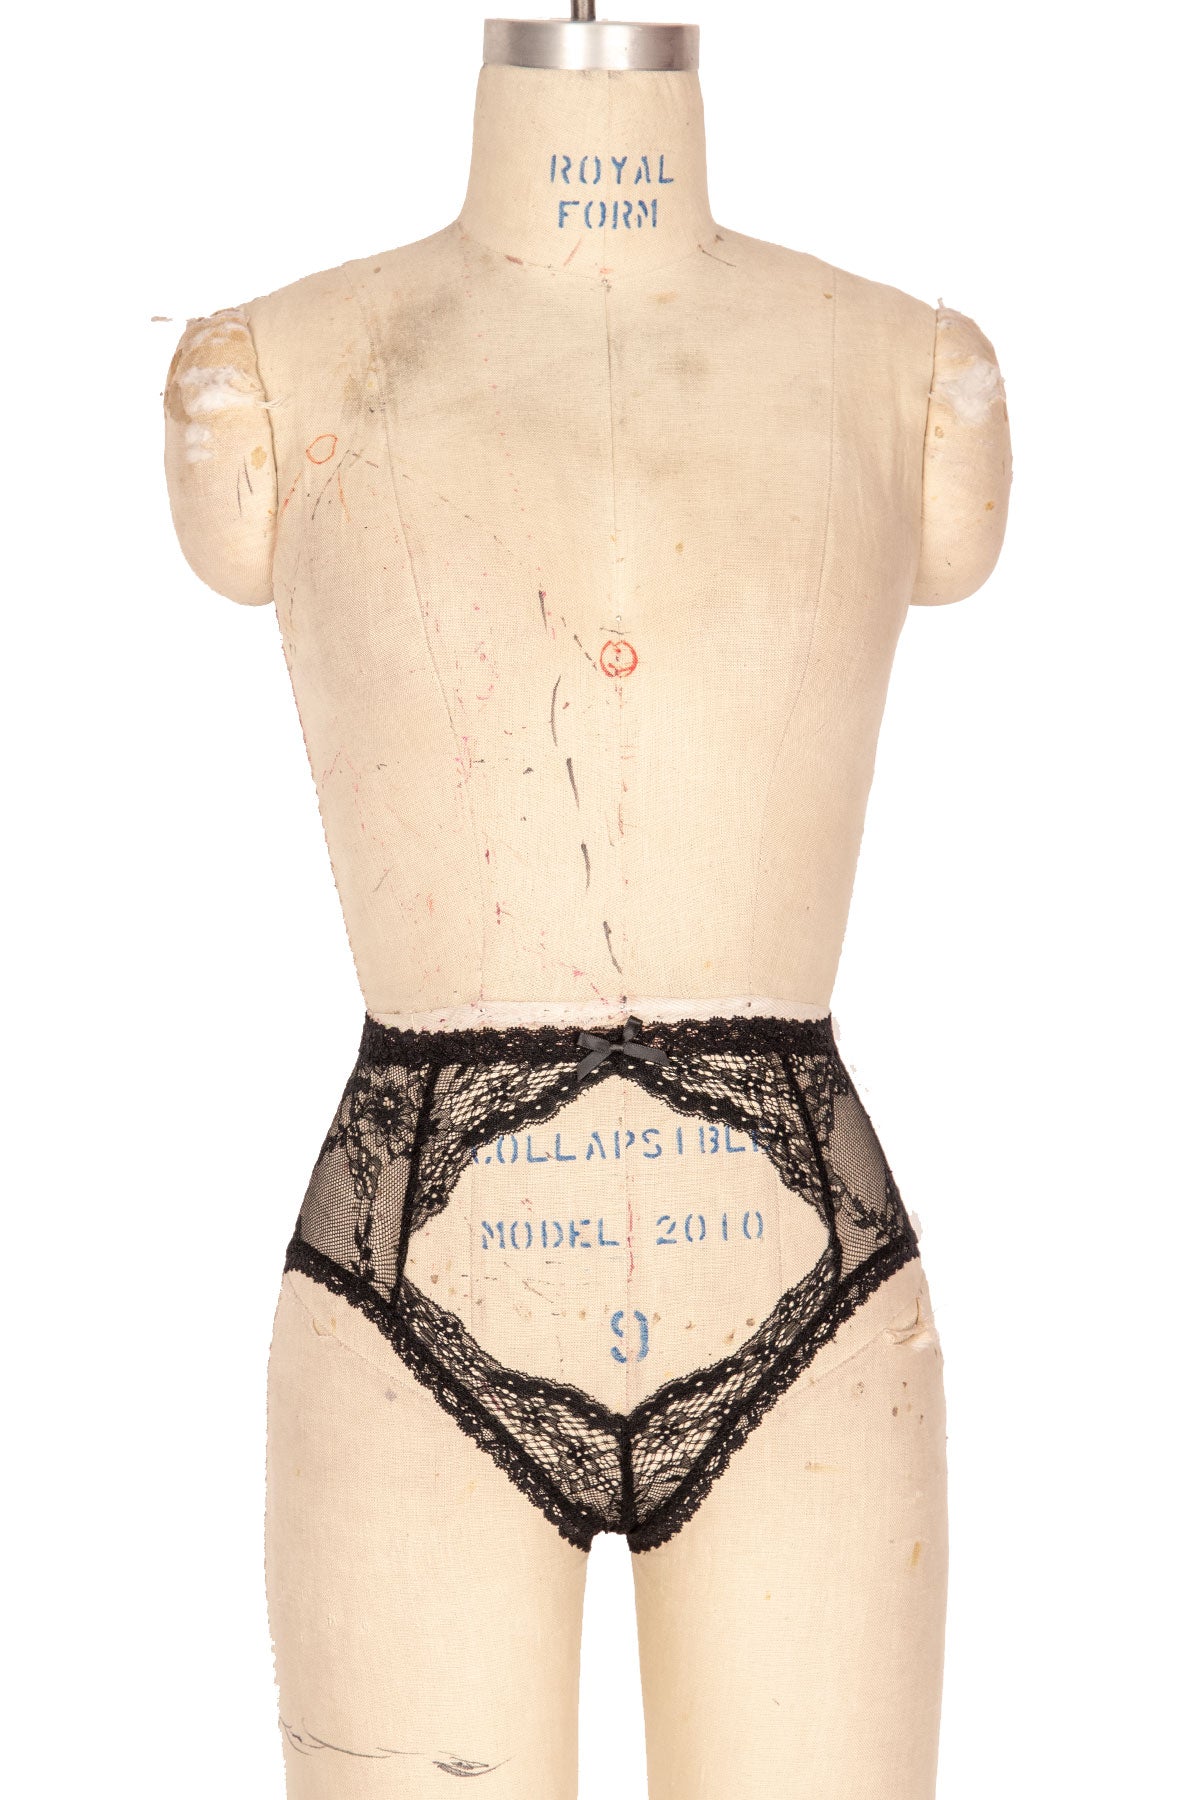 Vintage Inspired Lingerie News – tagged front fastening waist